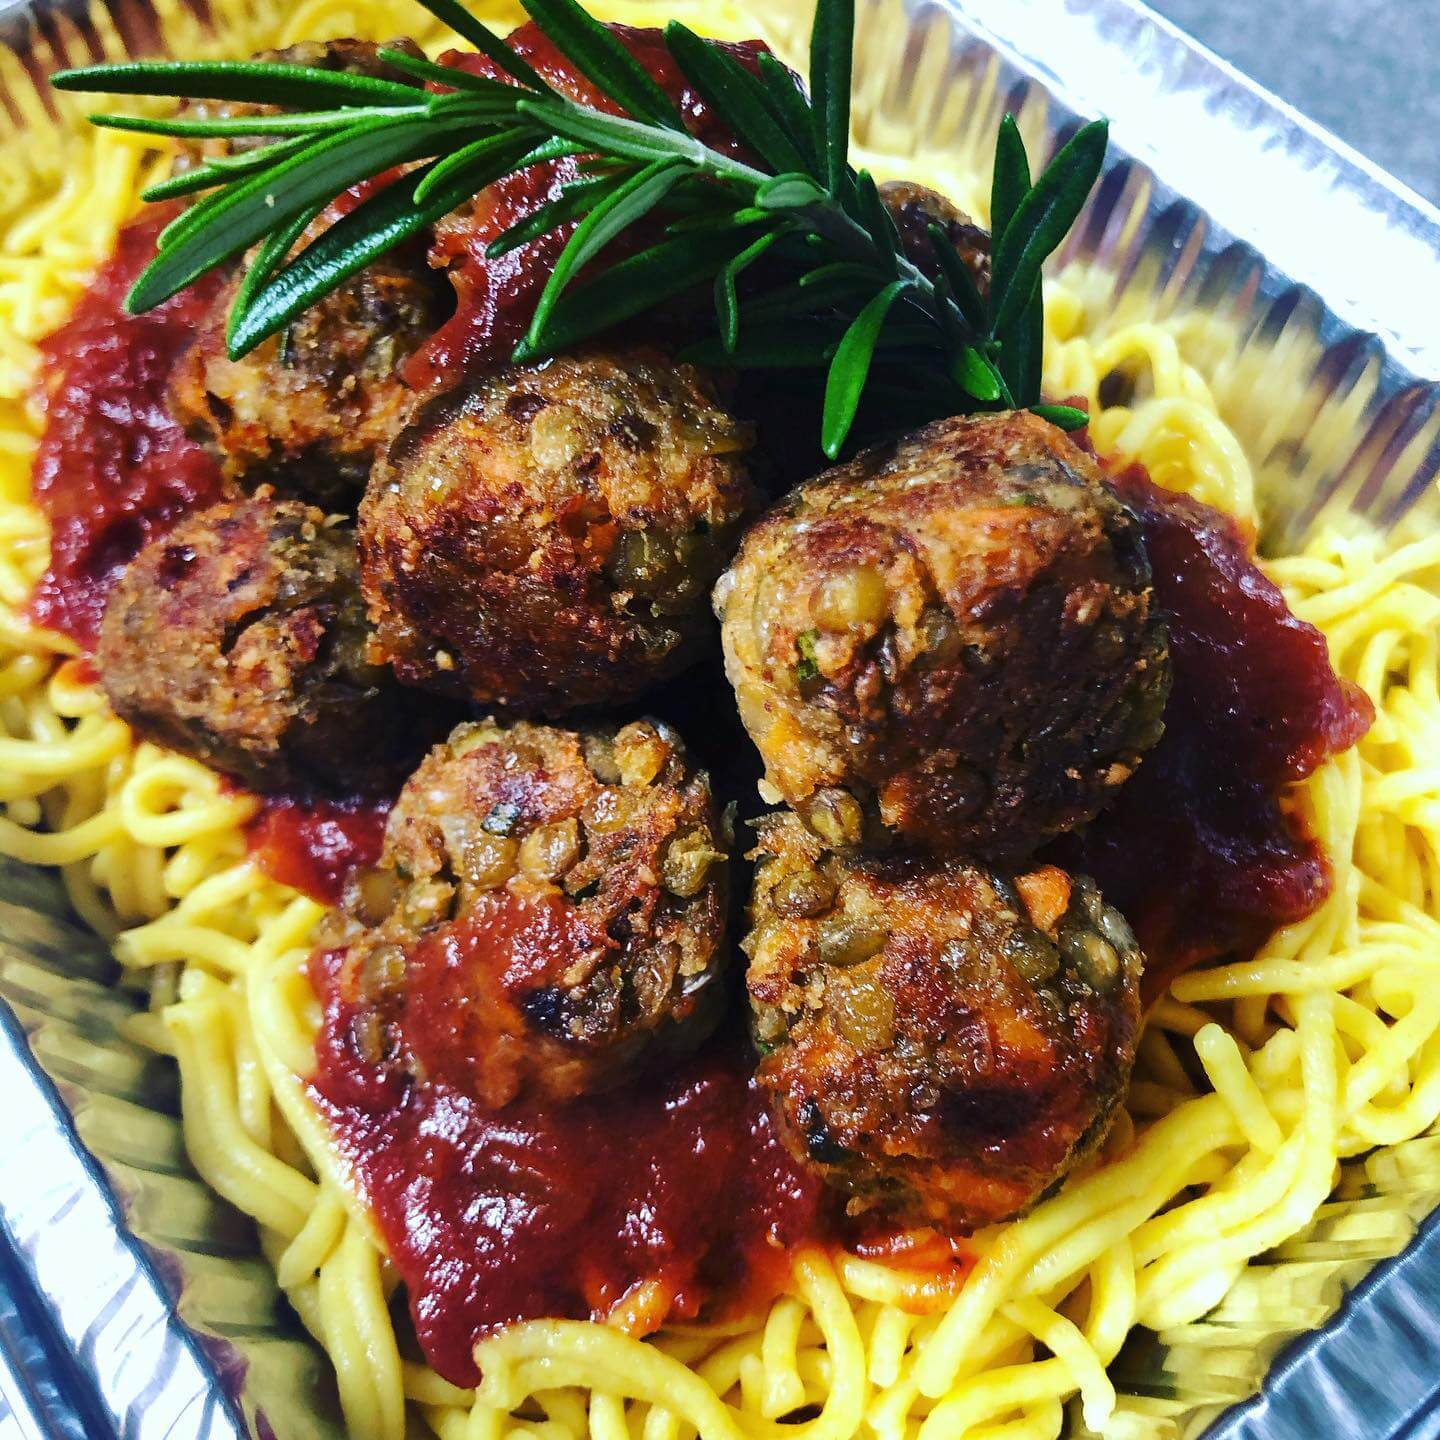 Pasta & 'meatballs' made with lentils 450g